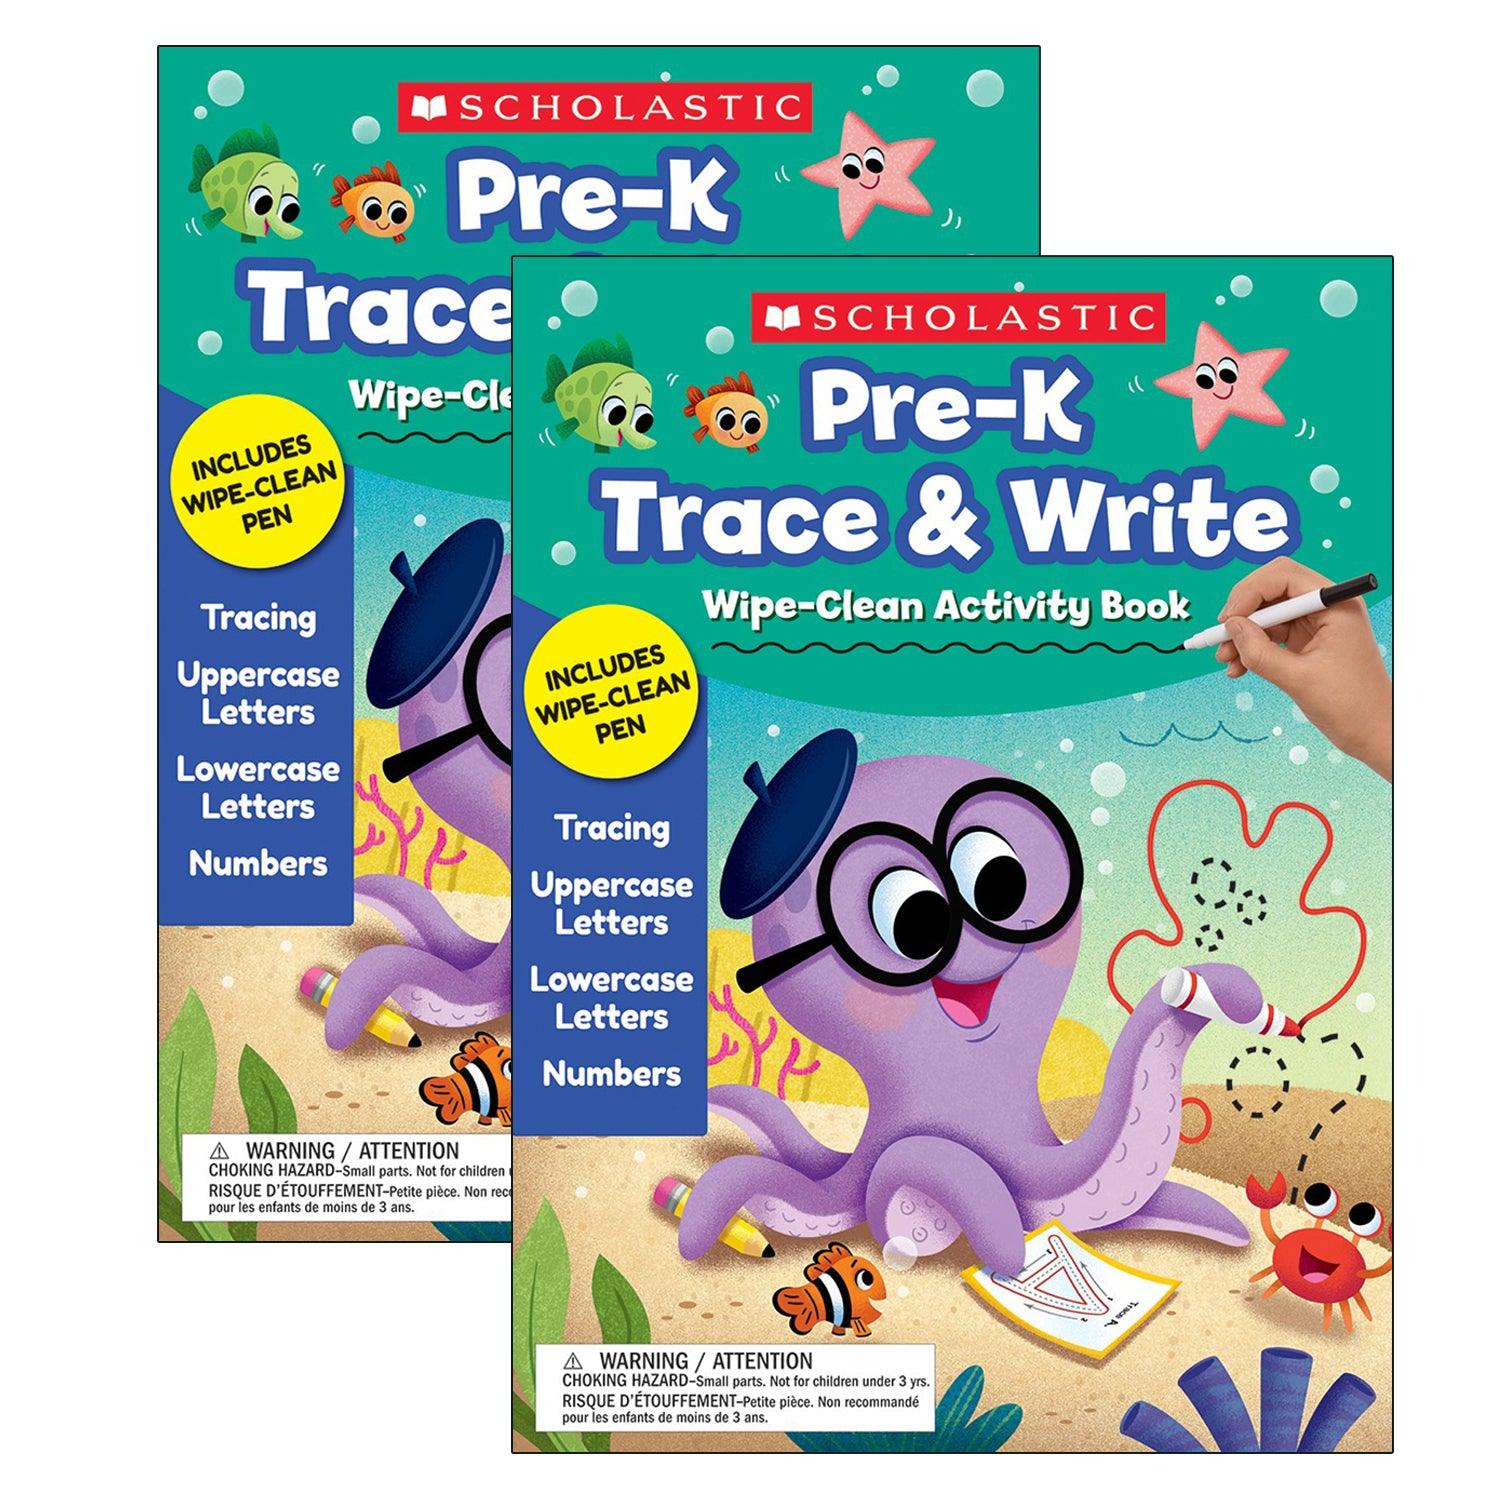 Pre-K Trace & Write Wipe-Clean Activity Book with Pen, Pack of 2 - Loomini